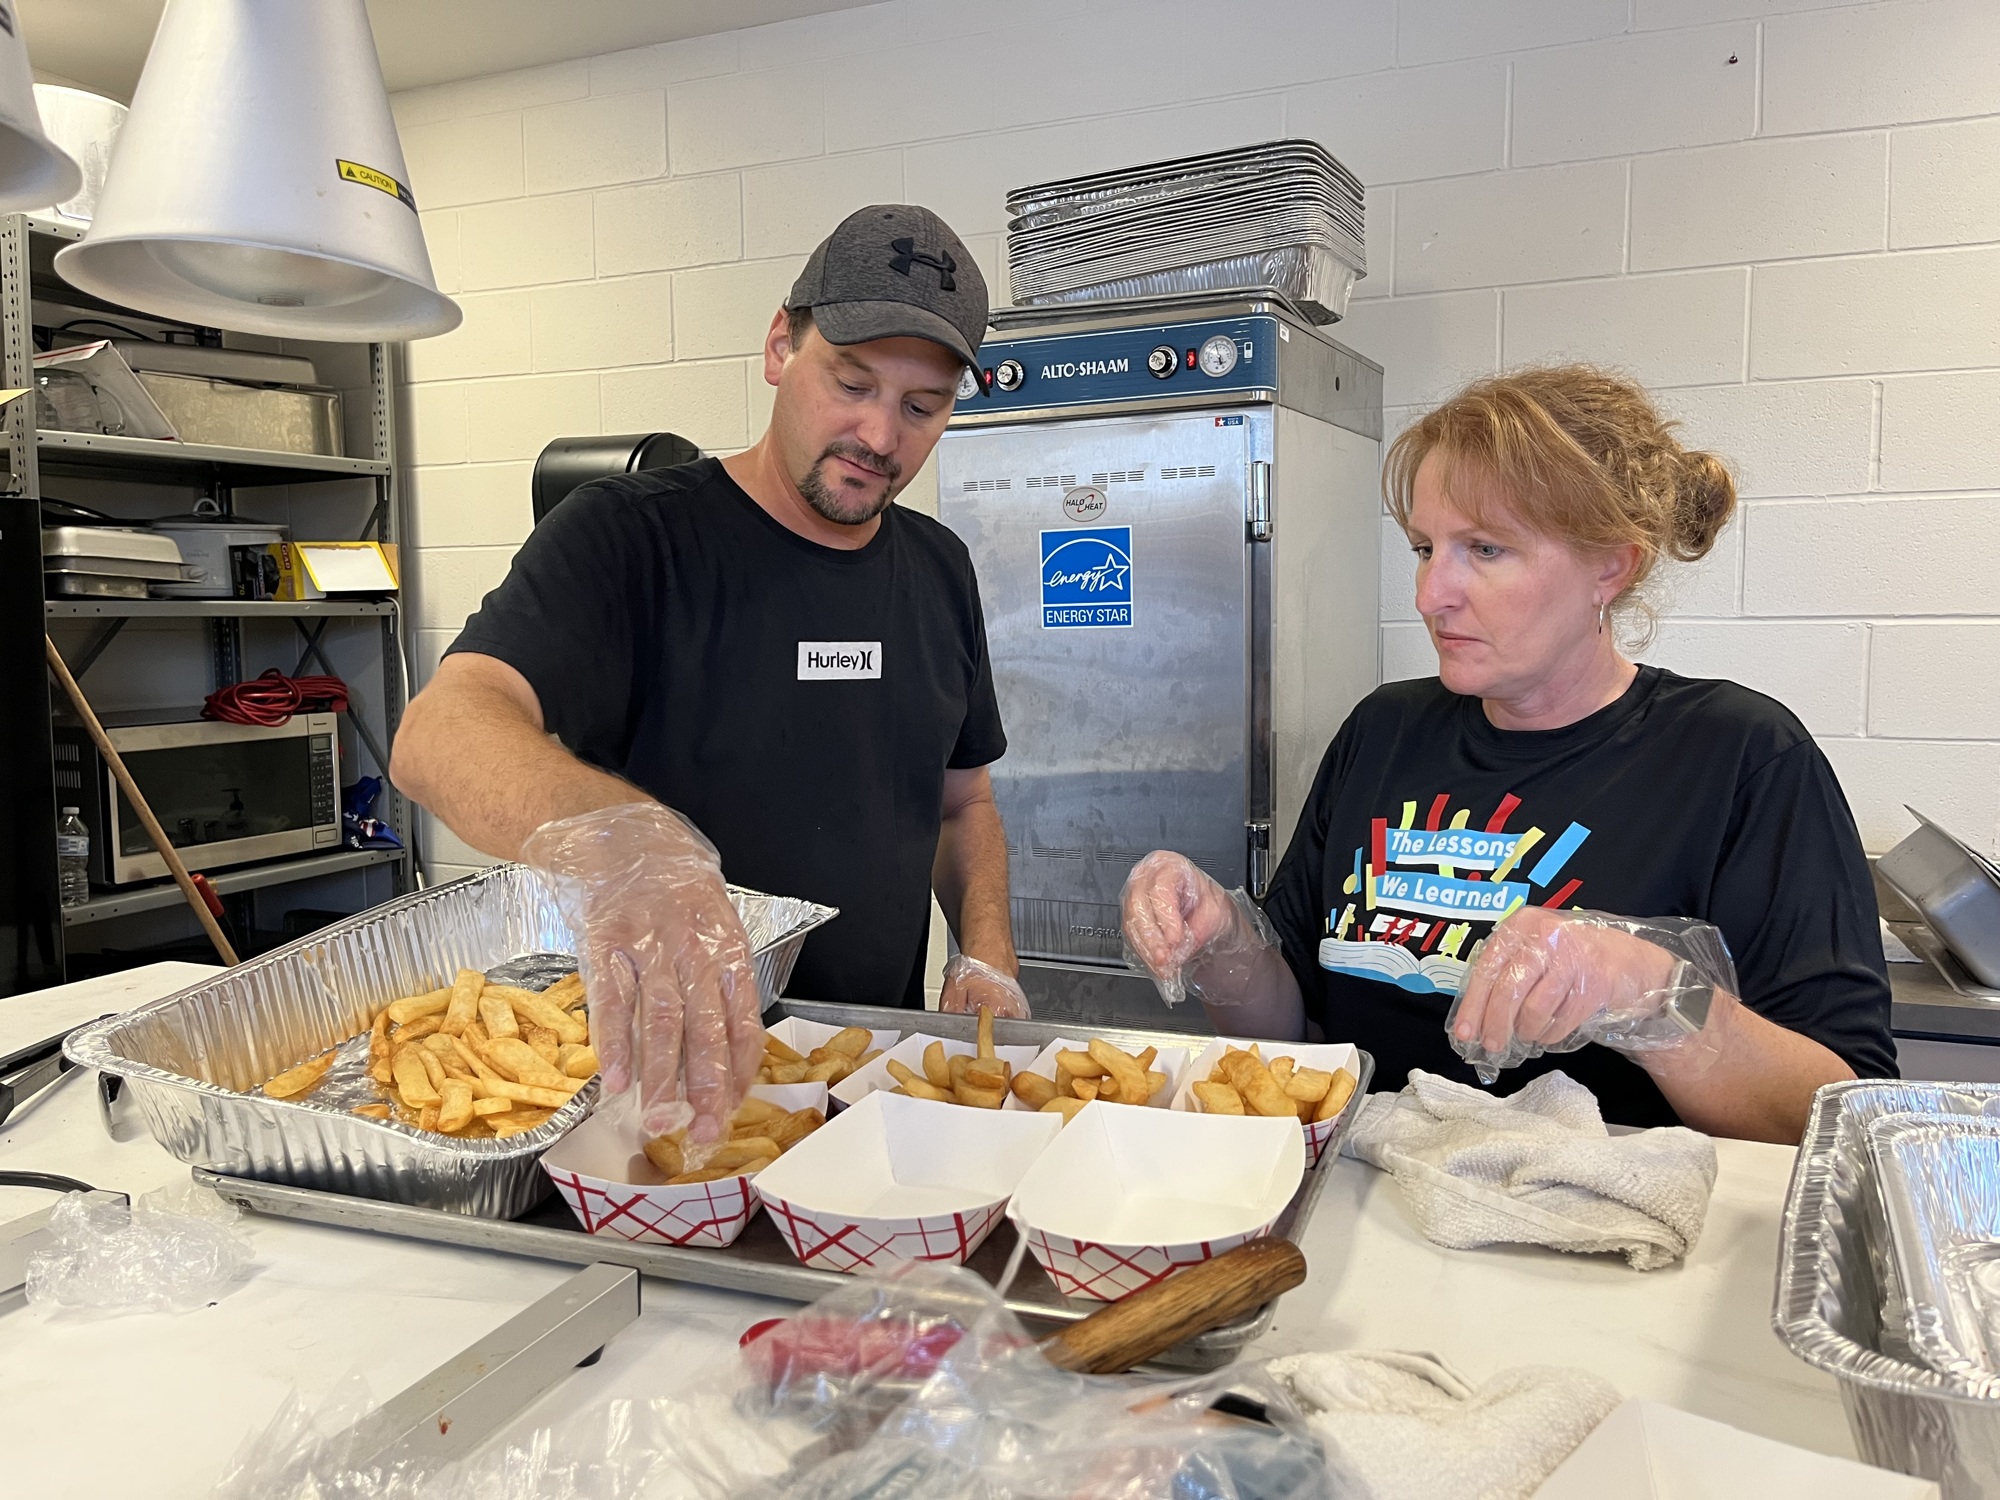 Parents like Braden River High's Jeremy Wade and Vanessa Embry work together in the concessions stand to support the band program. Parents say they become more like family after working hours together.